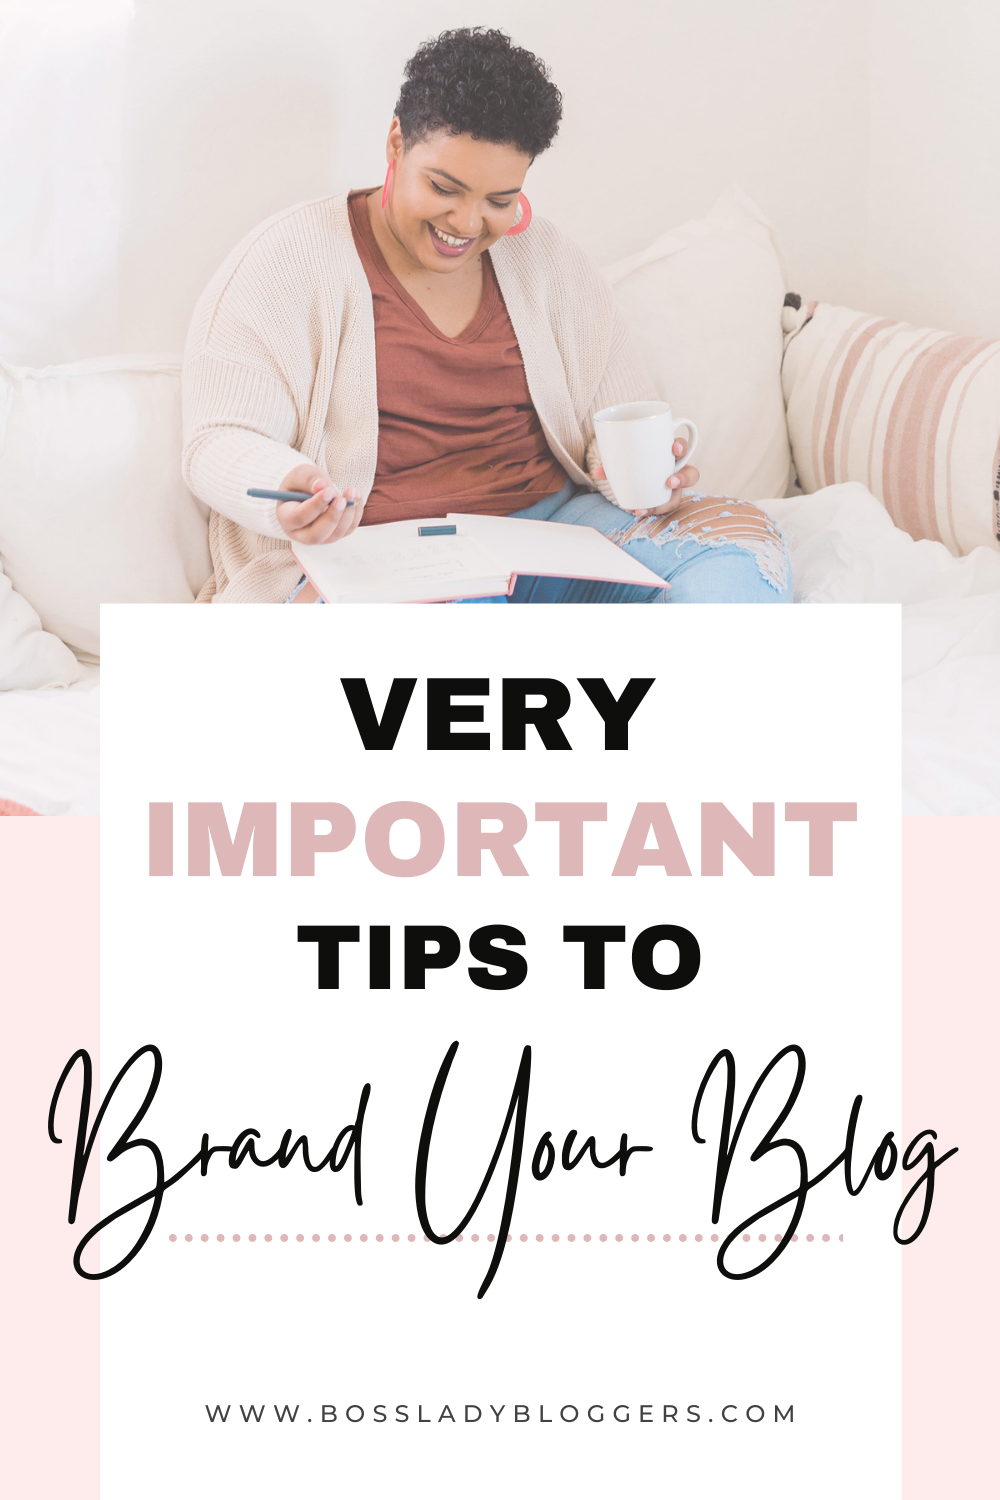 Picture of a lady working while sitting on the bed branding her blog.